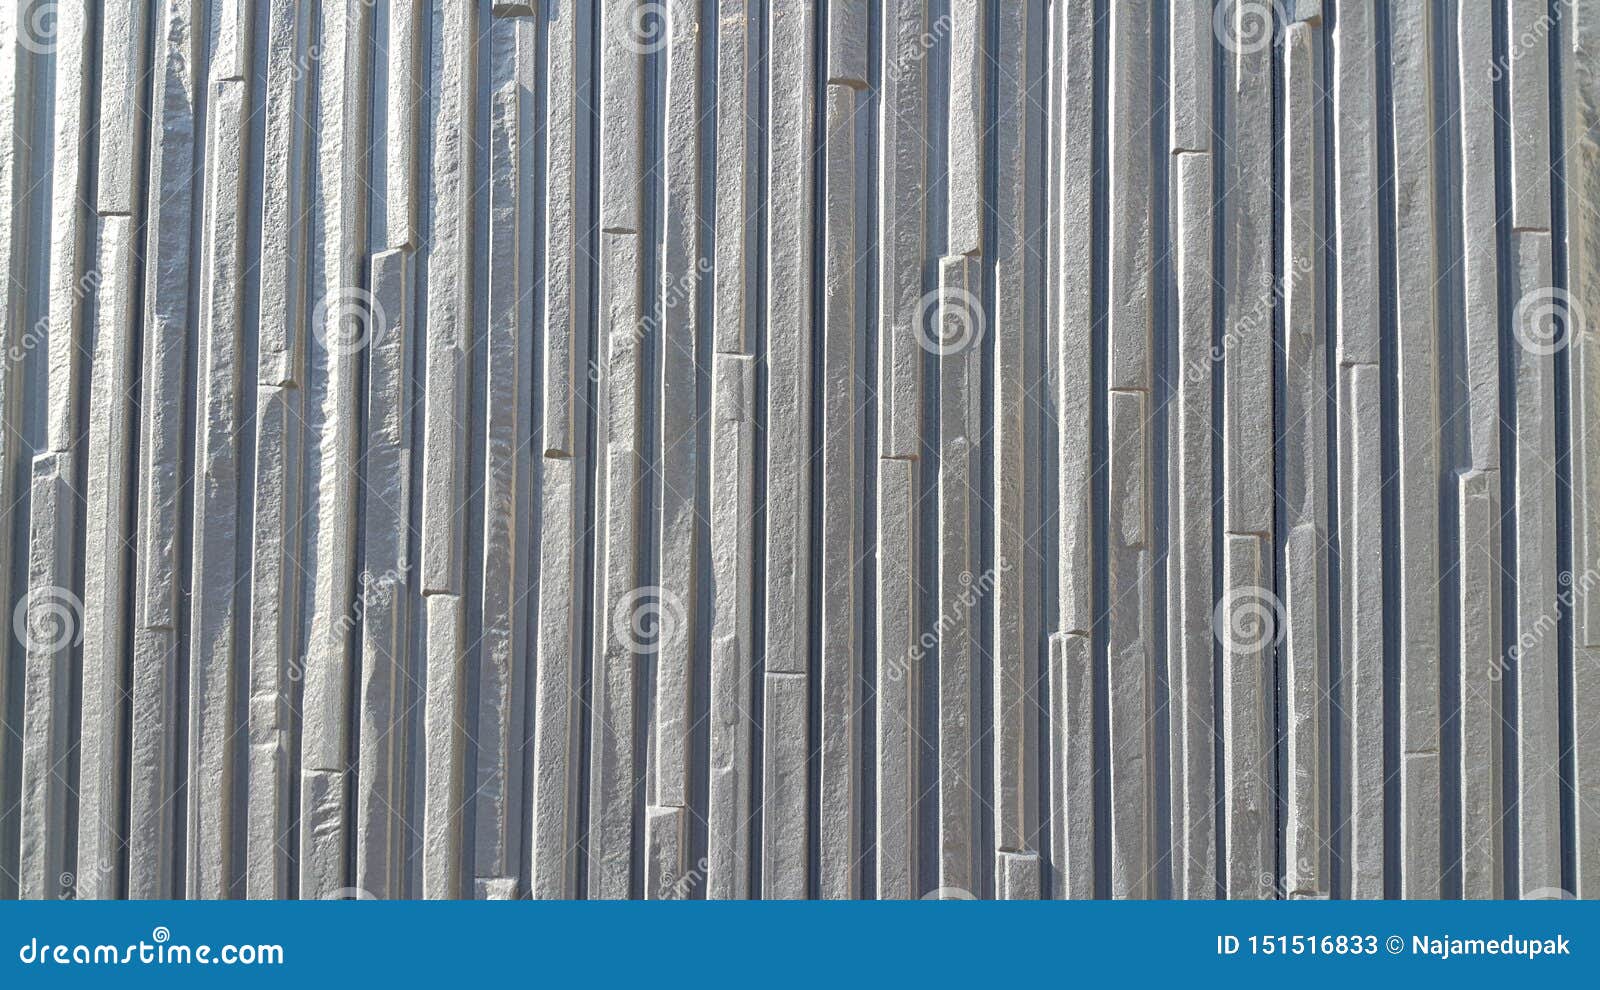 Close Up View Of Wood Stripes Background Of Interior Walls